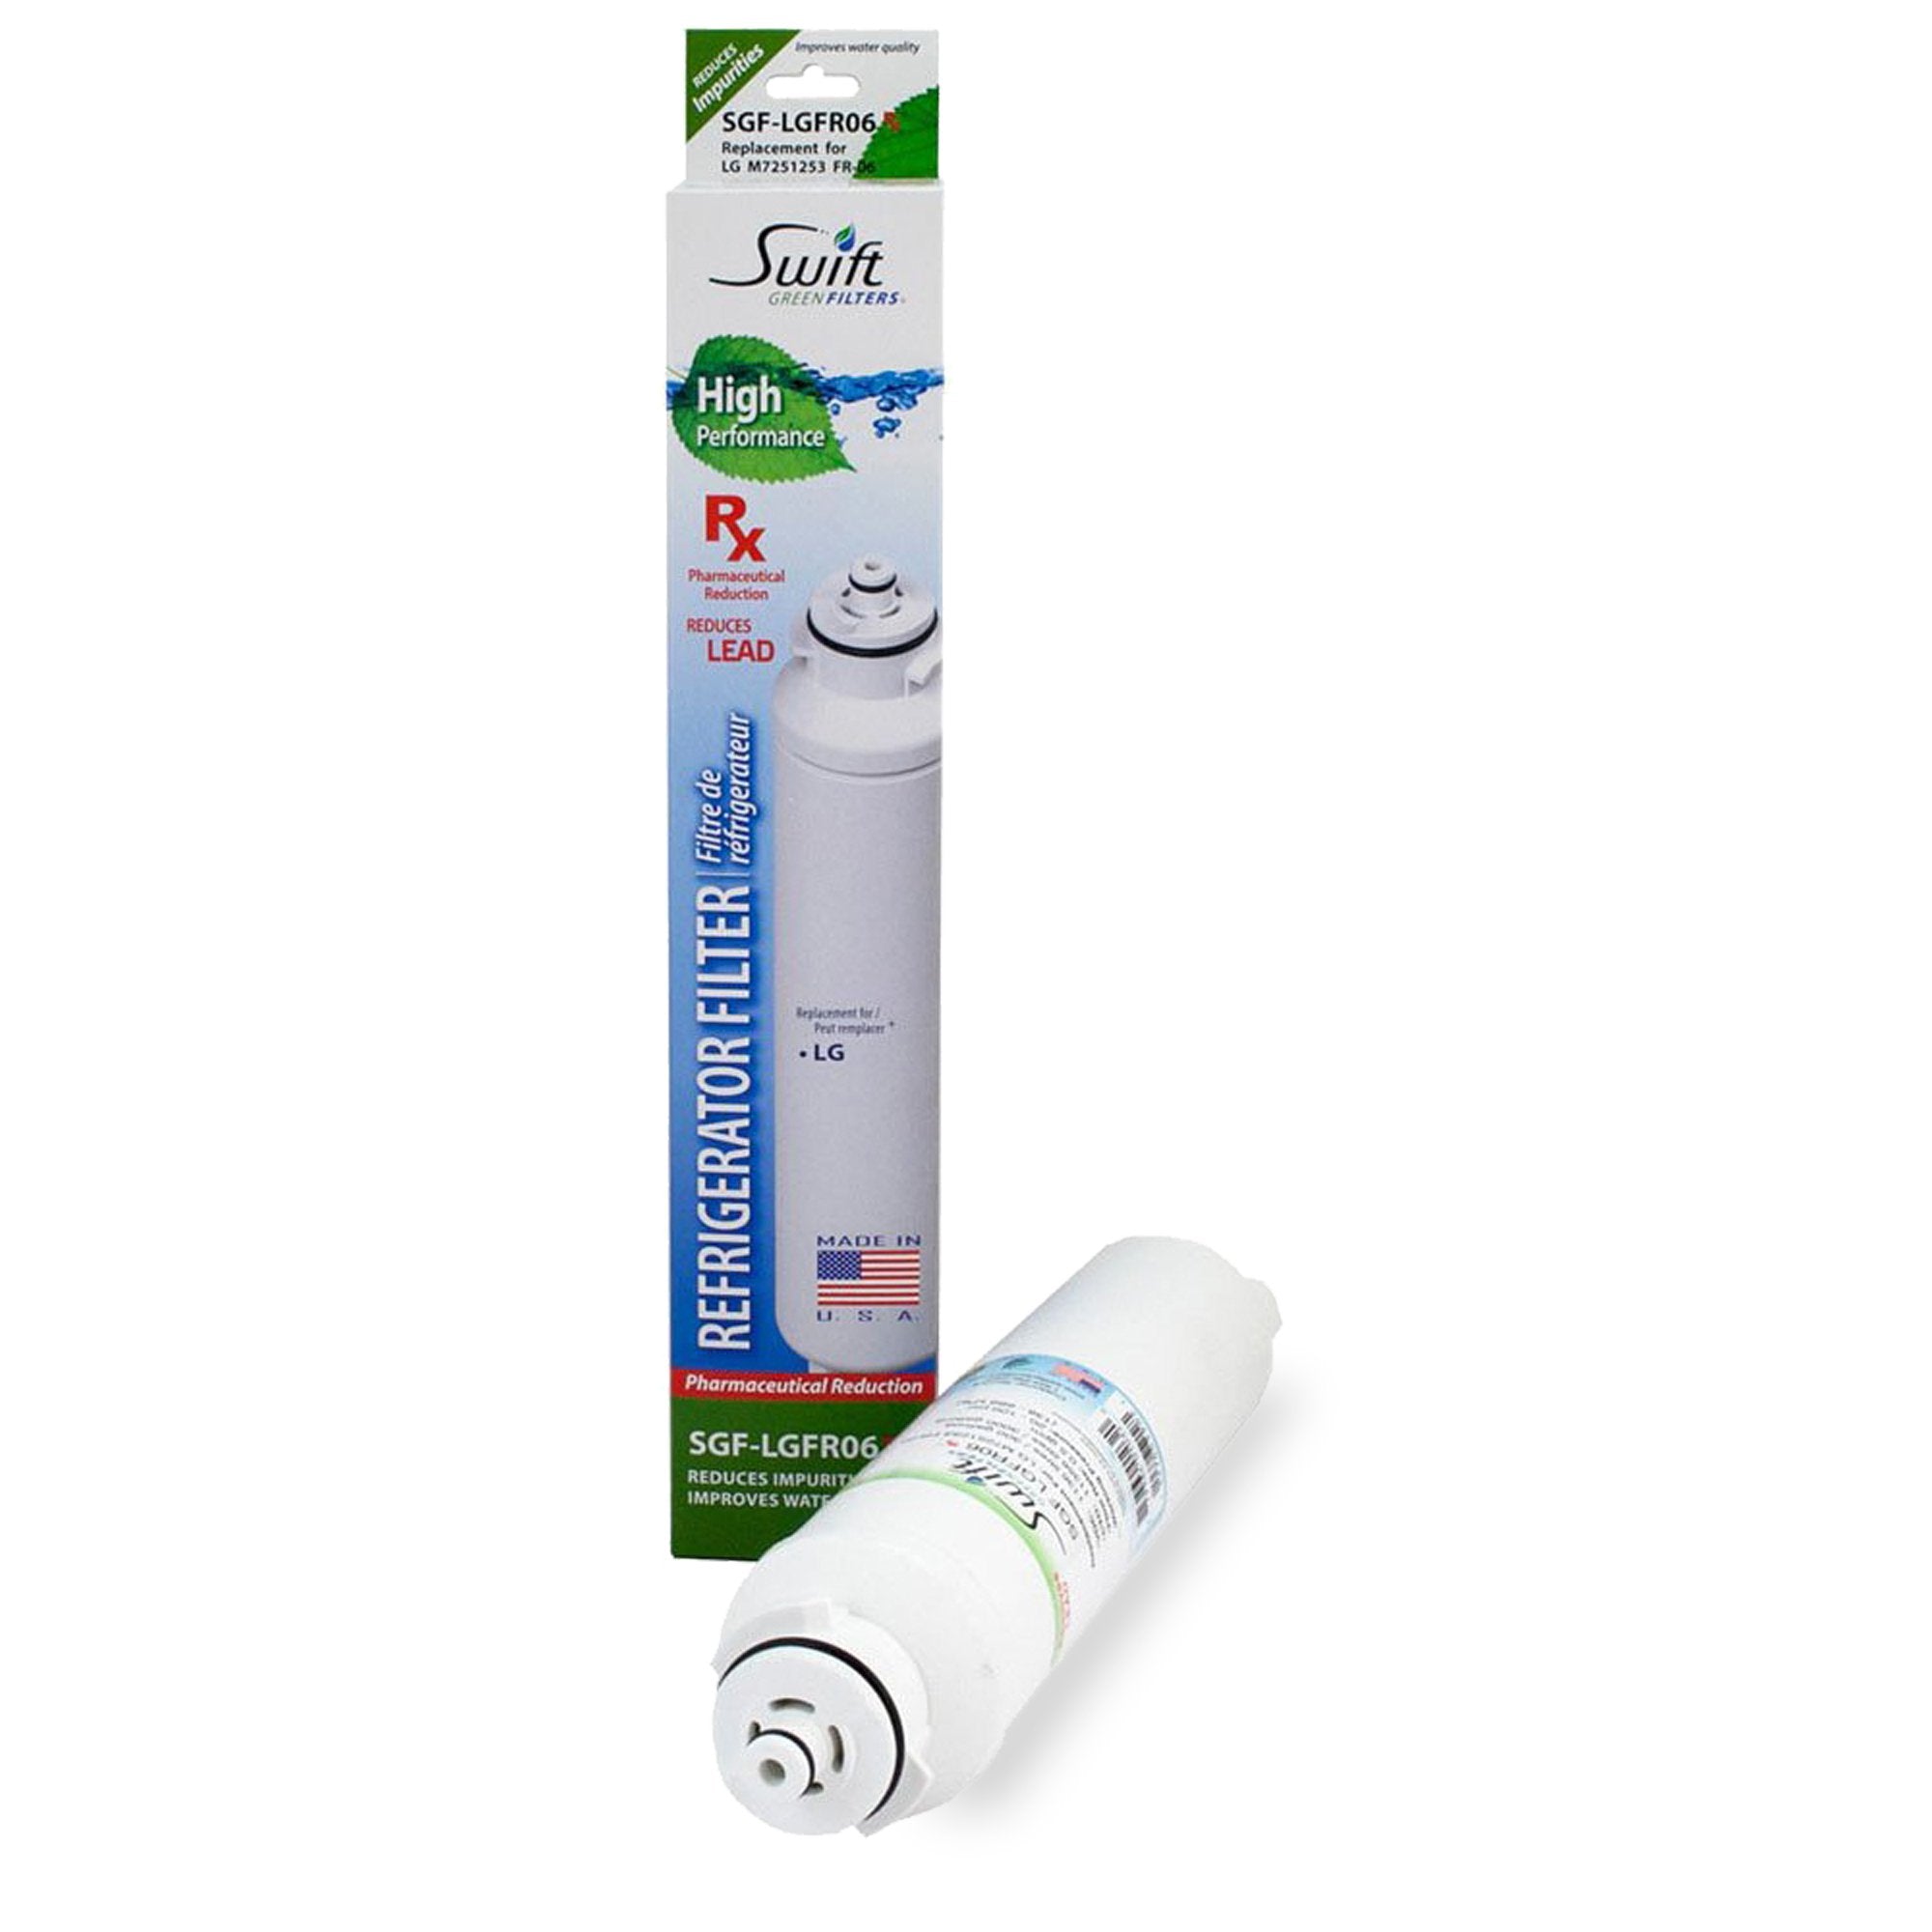 LG M7251242FR-06, M7251252FR-06 & EcoAqua EFF-6028A Compatible Pharmaceutical Refrigerator Water Filter